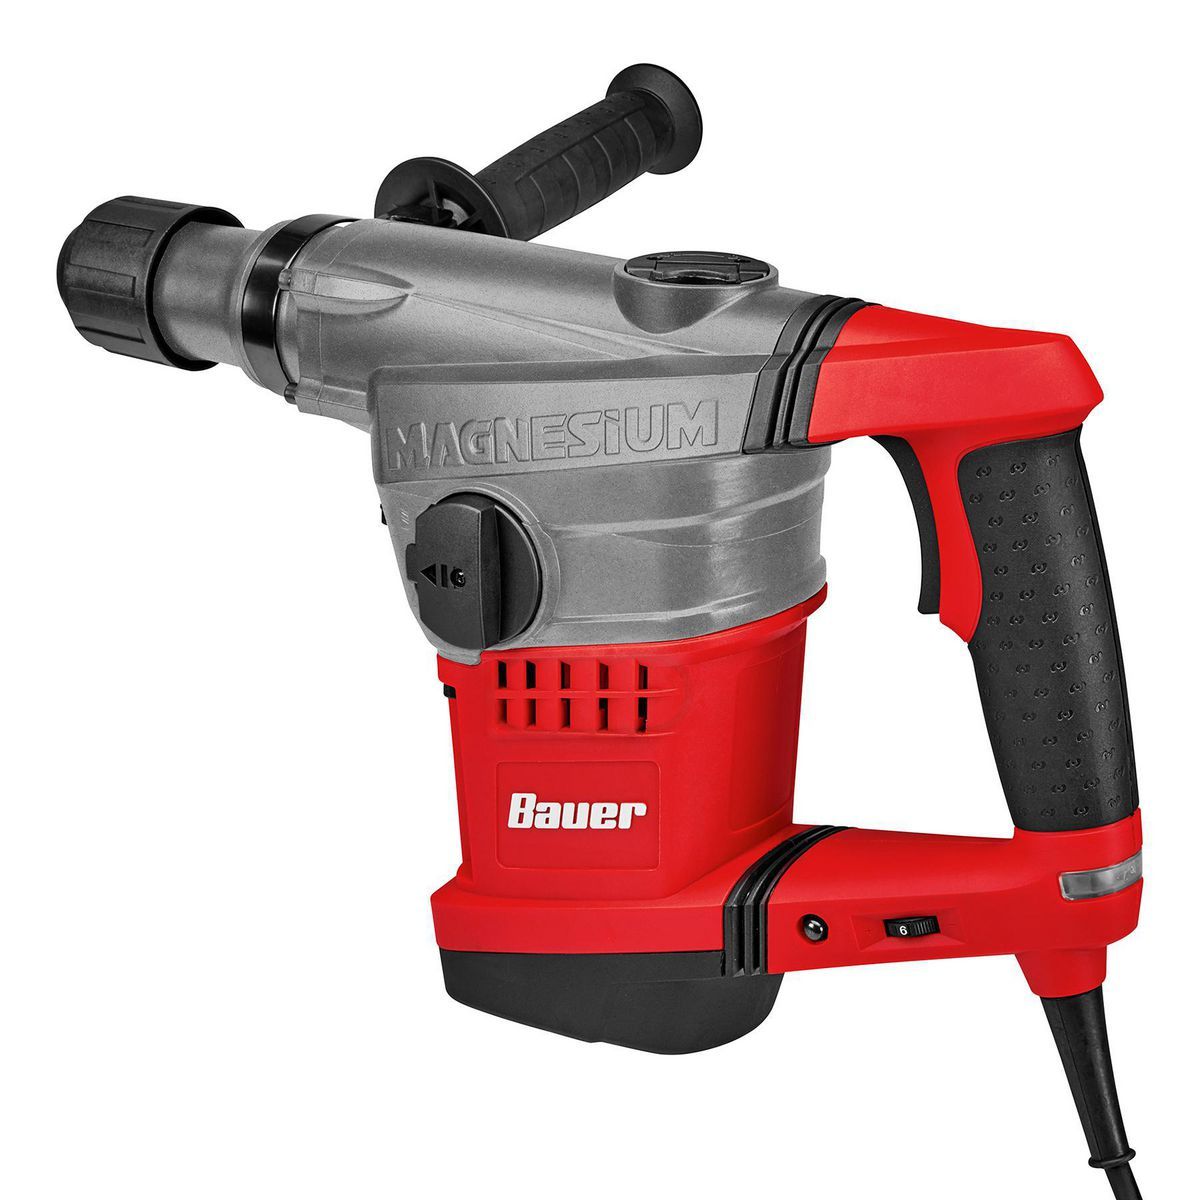 11 Amp 1-9/16 in. SDS-MAX Type Variable-Speed Rotary Hammer